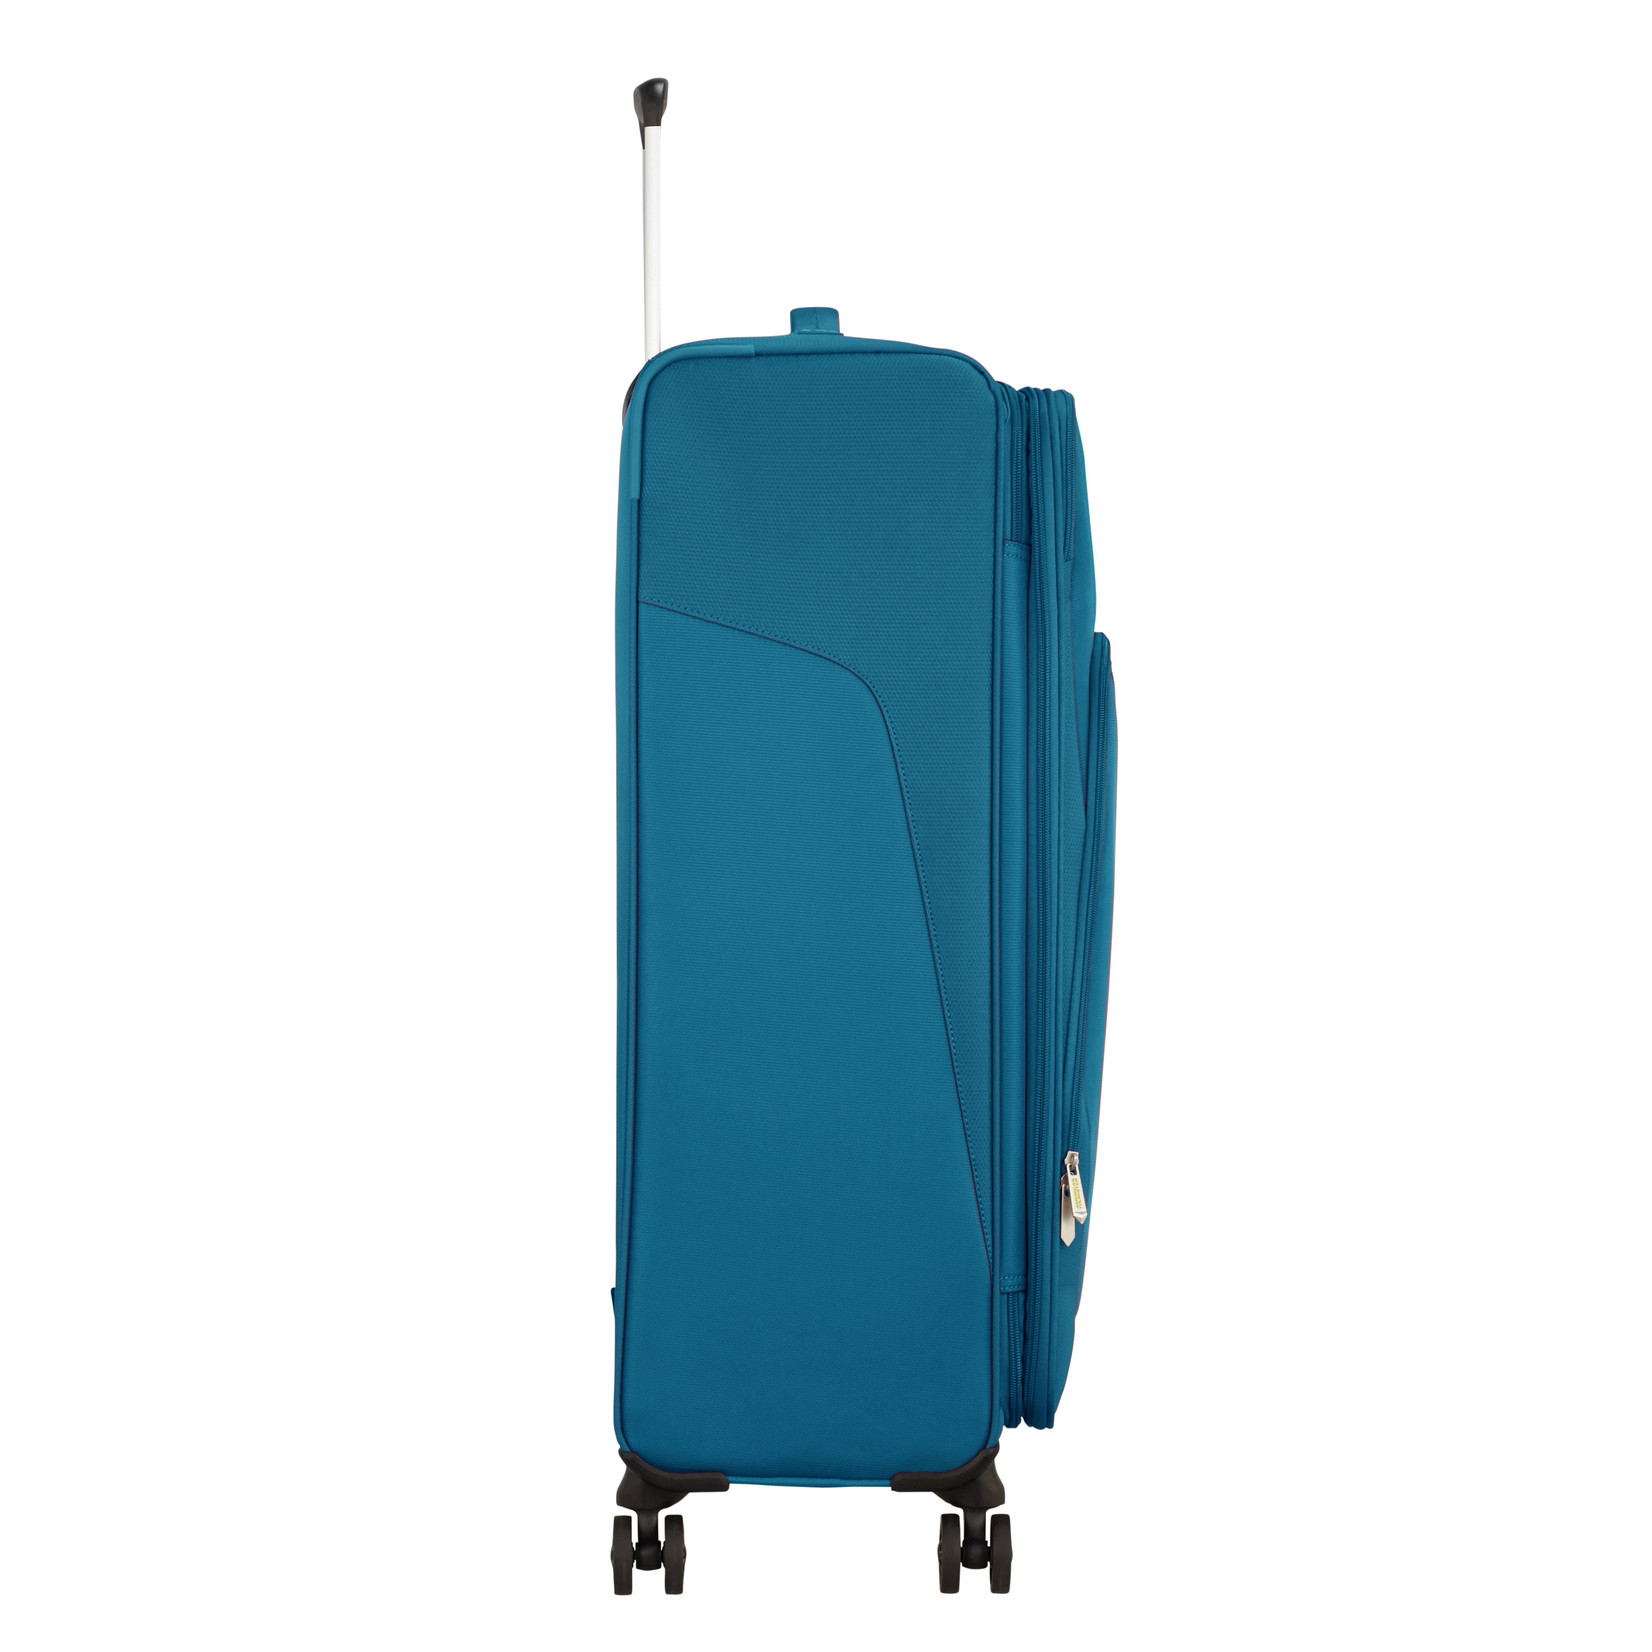 American Tourister American Tourister Summerfunk spinner 79- teal